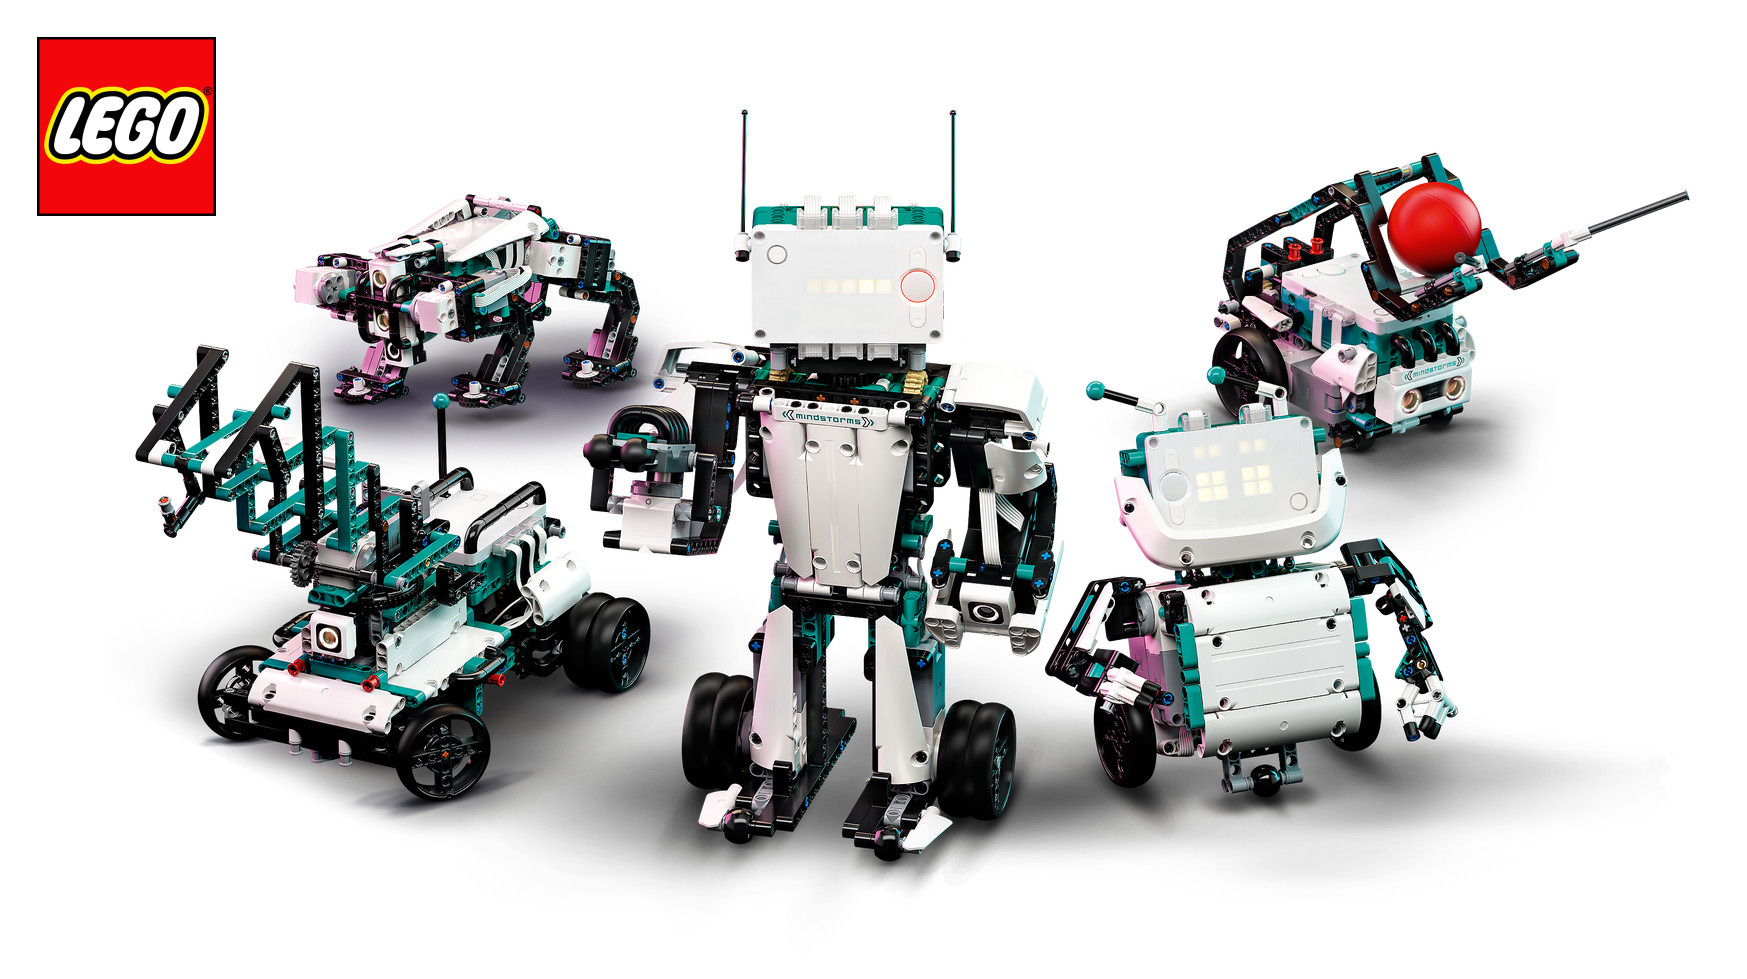 Sympton Geliefde Gedwongen Lego to discontinue Mindstorms robot line after a 24-year run | Ars Technica